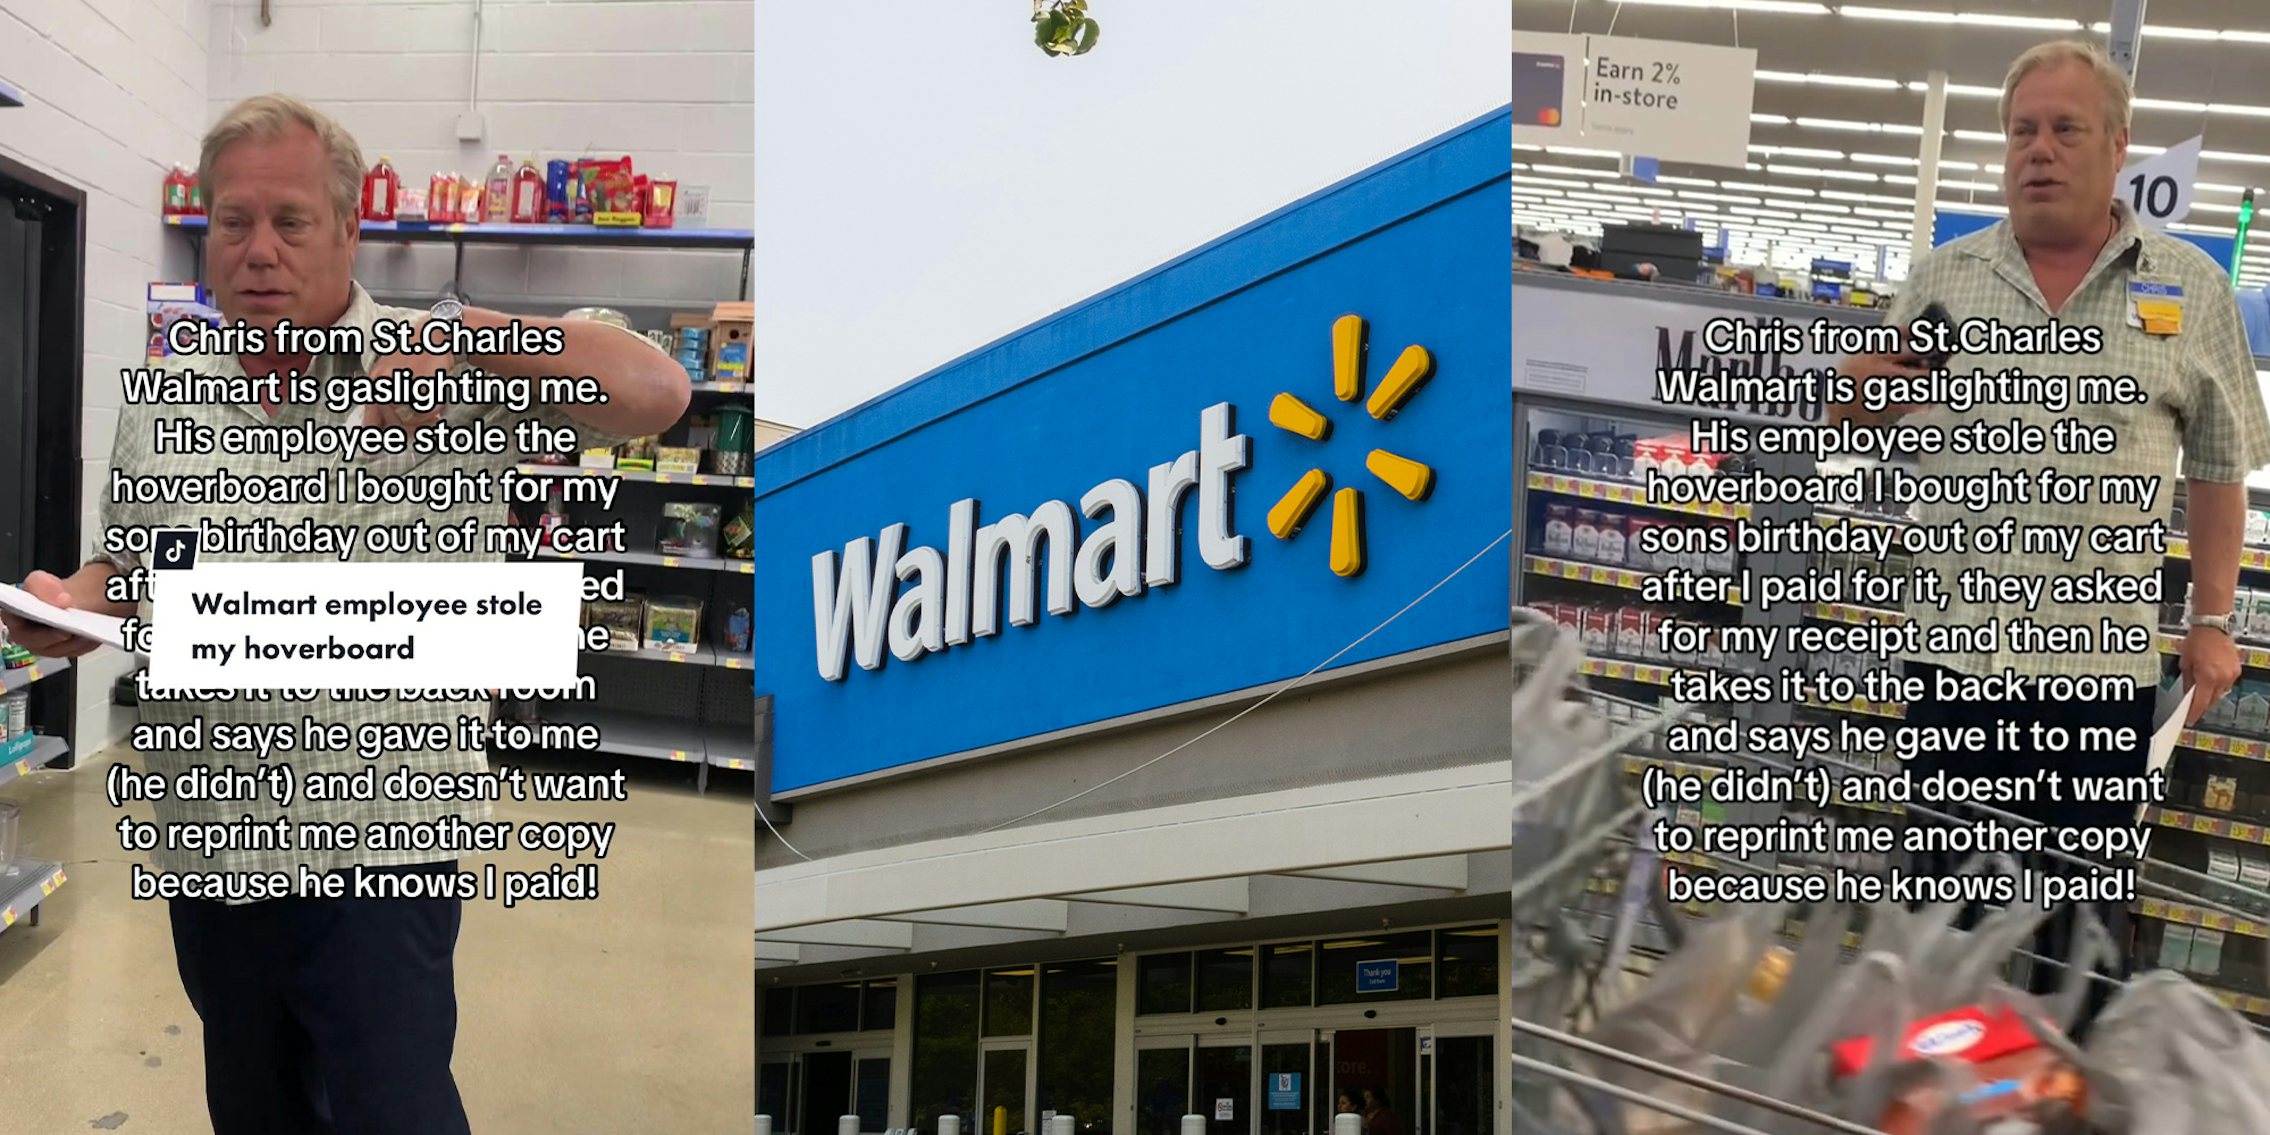 customer says Wal-Mart worker 'stole' her son's hoverboard after she paid for it